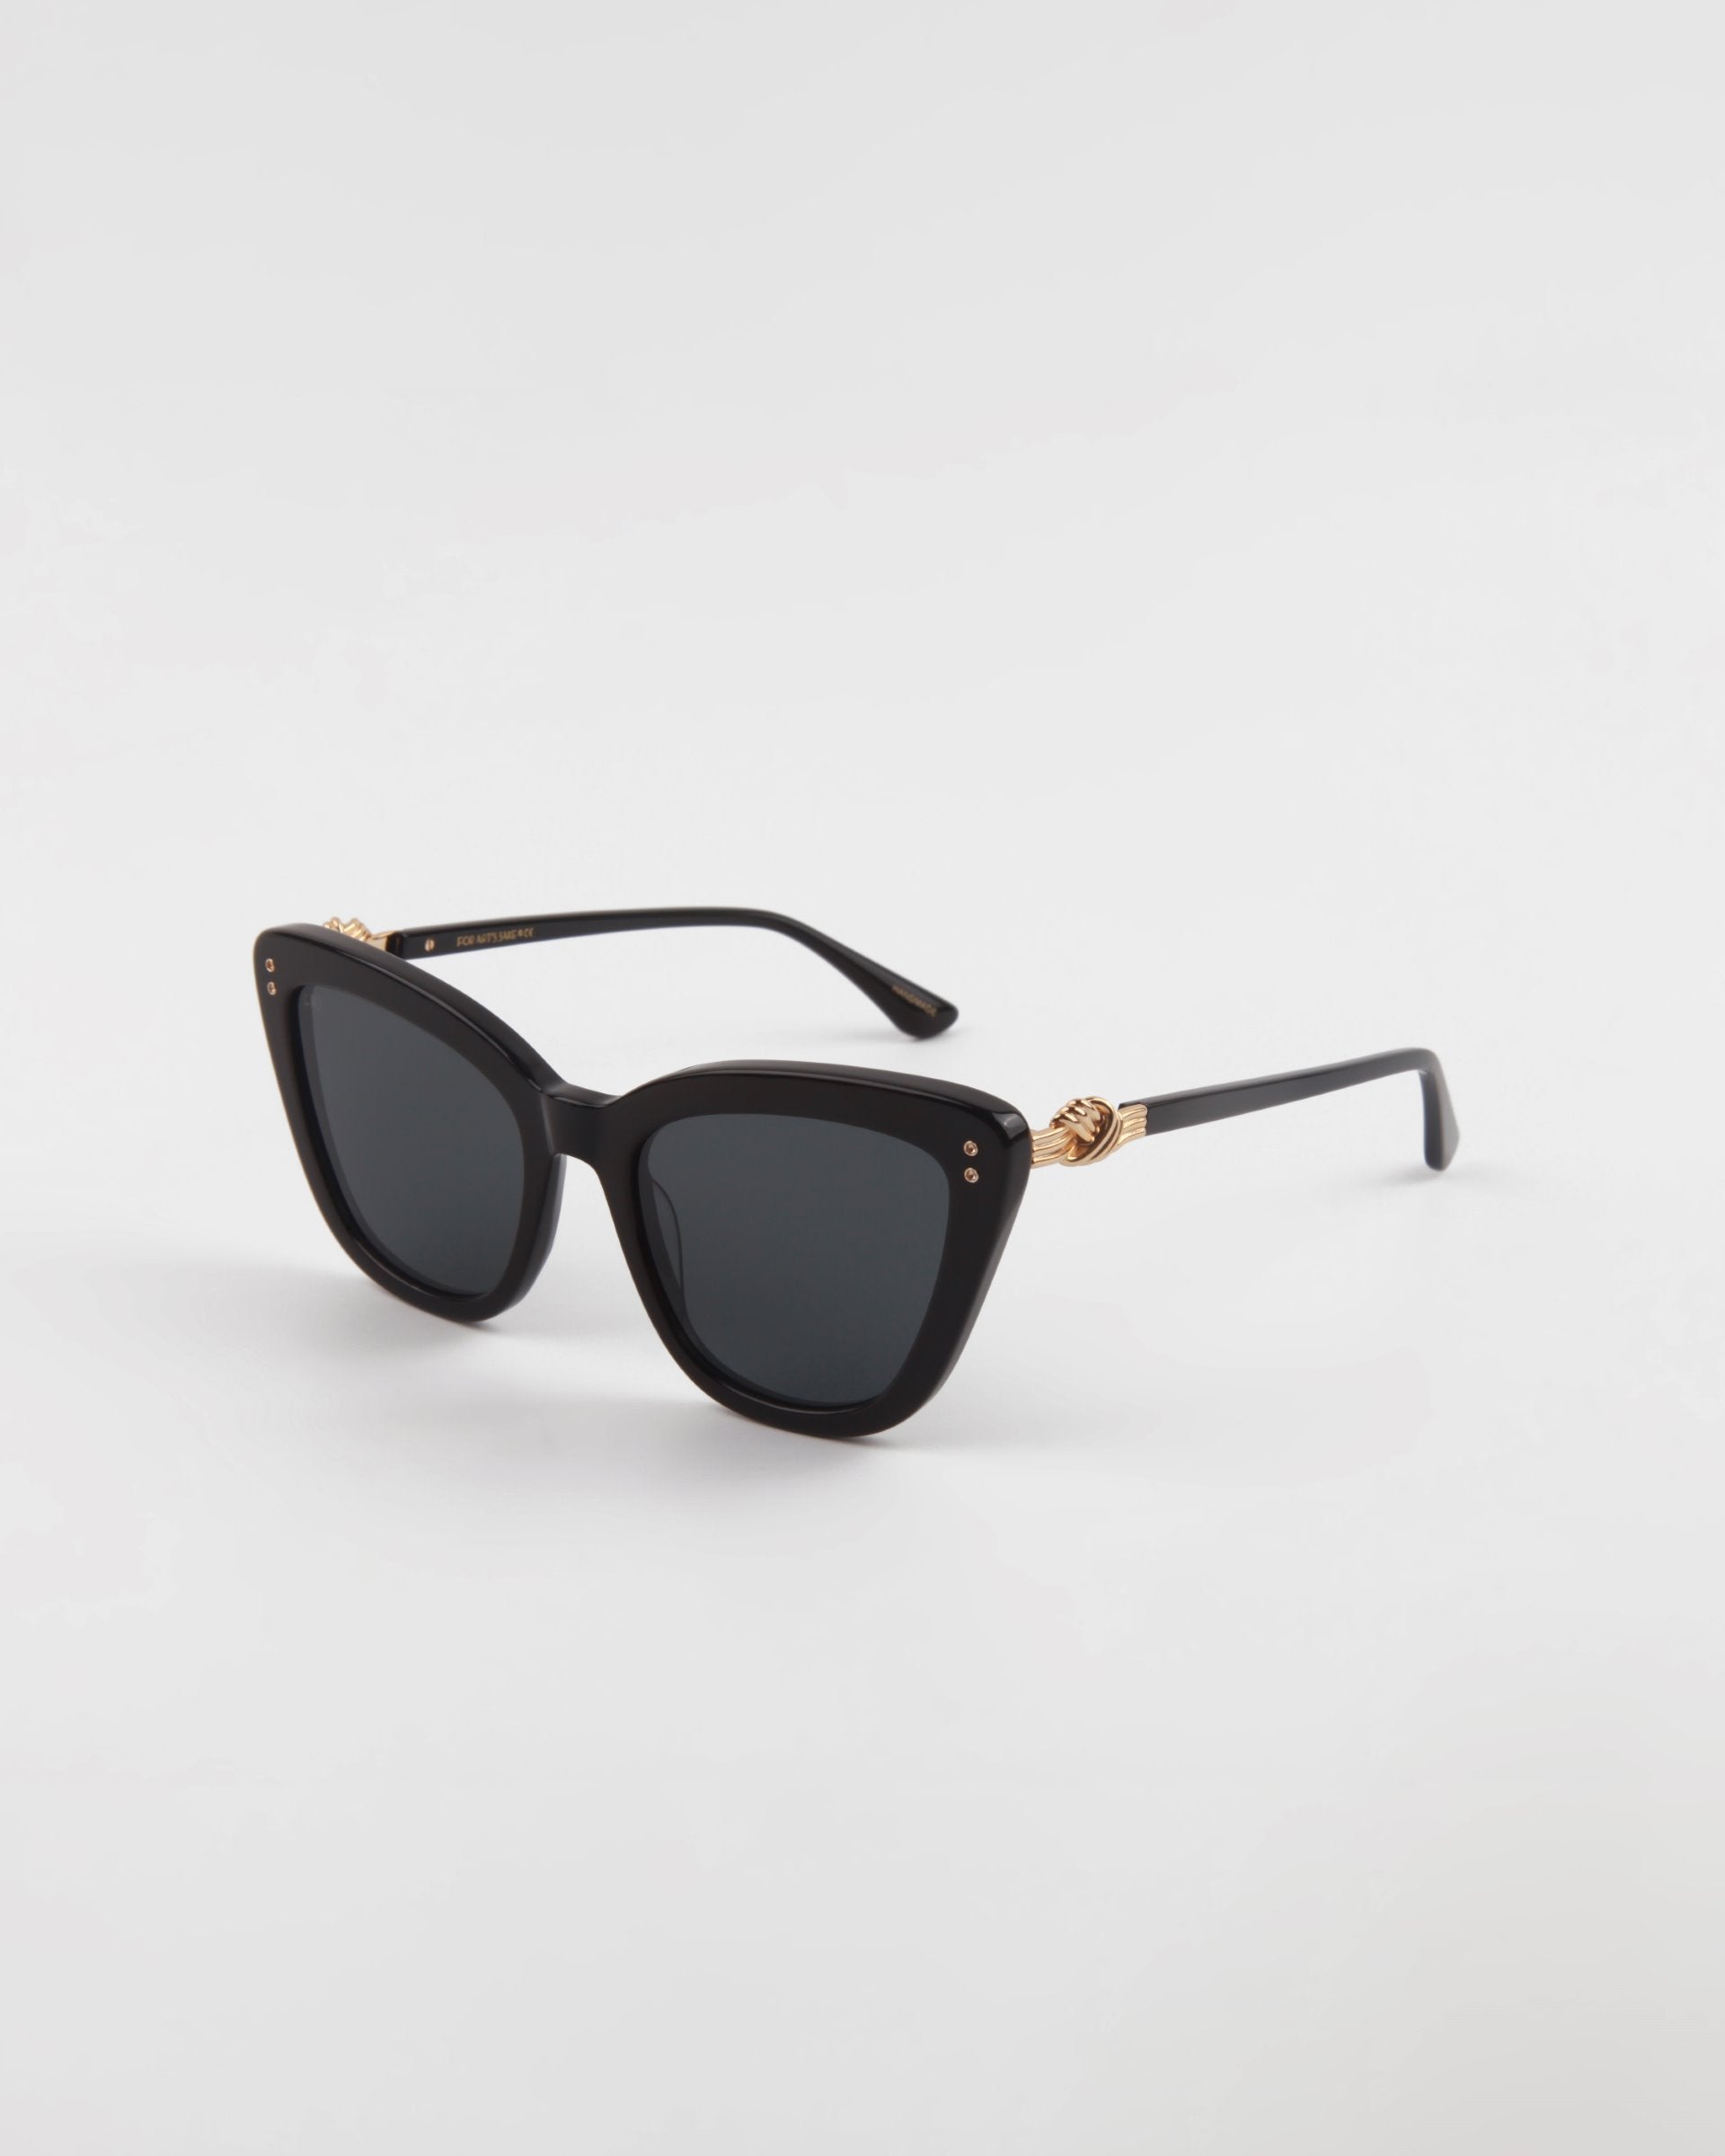 A pair of black, handmade acetate cat-eye **Ice Cream** sunglasses with dark lenses and gold embellishments on the arms from **For Art&#39;s Sake®.** The **Ice Cream** sunglasses offer UVA &amp; UVB protection and are set against a plain white background, highlighting their sleek and stylish design.